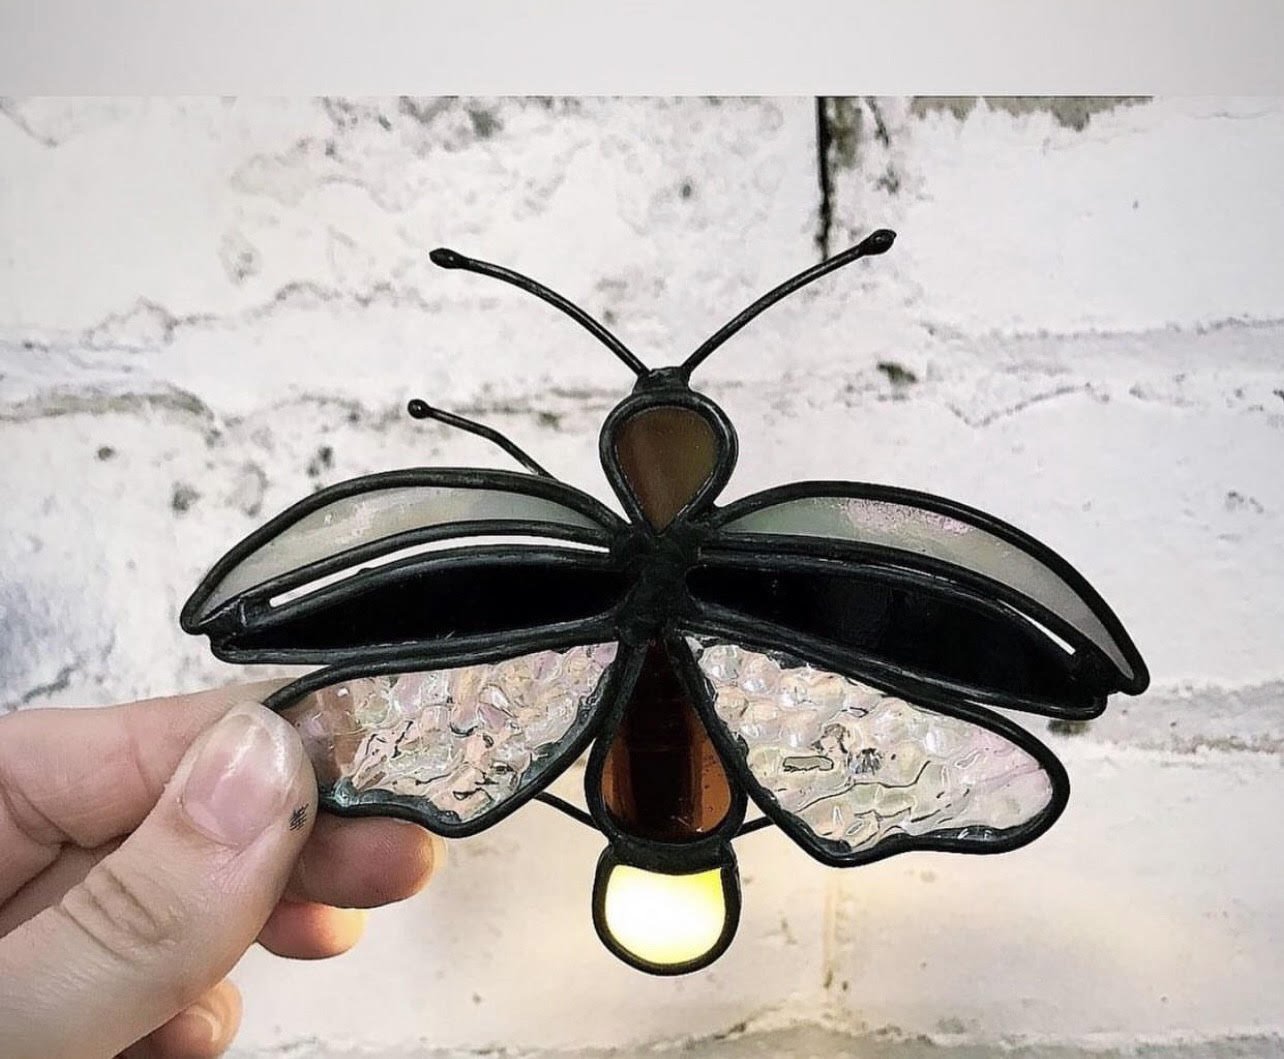 Firefly stained glass light up.jpg